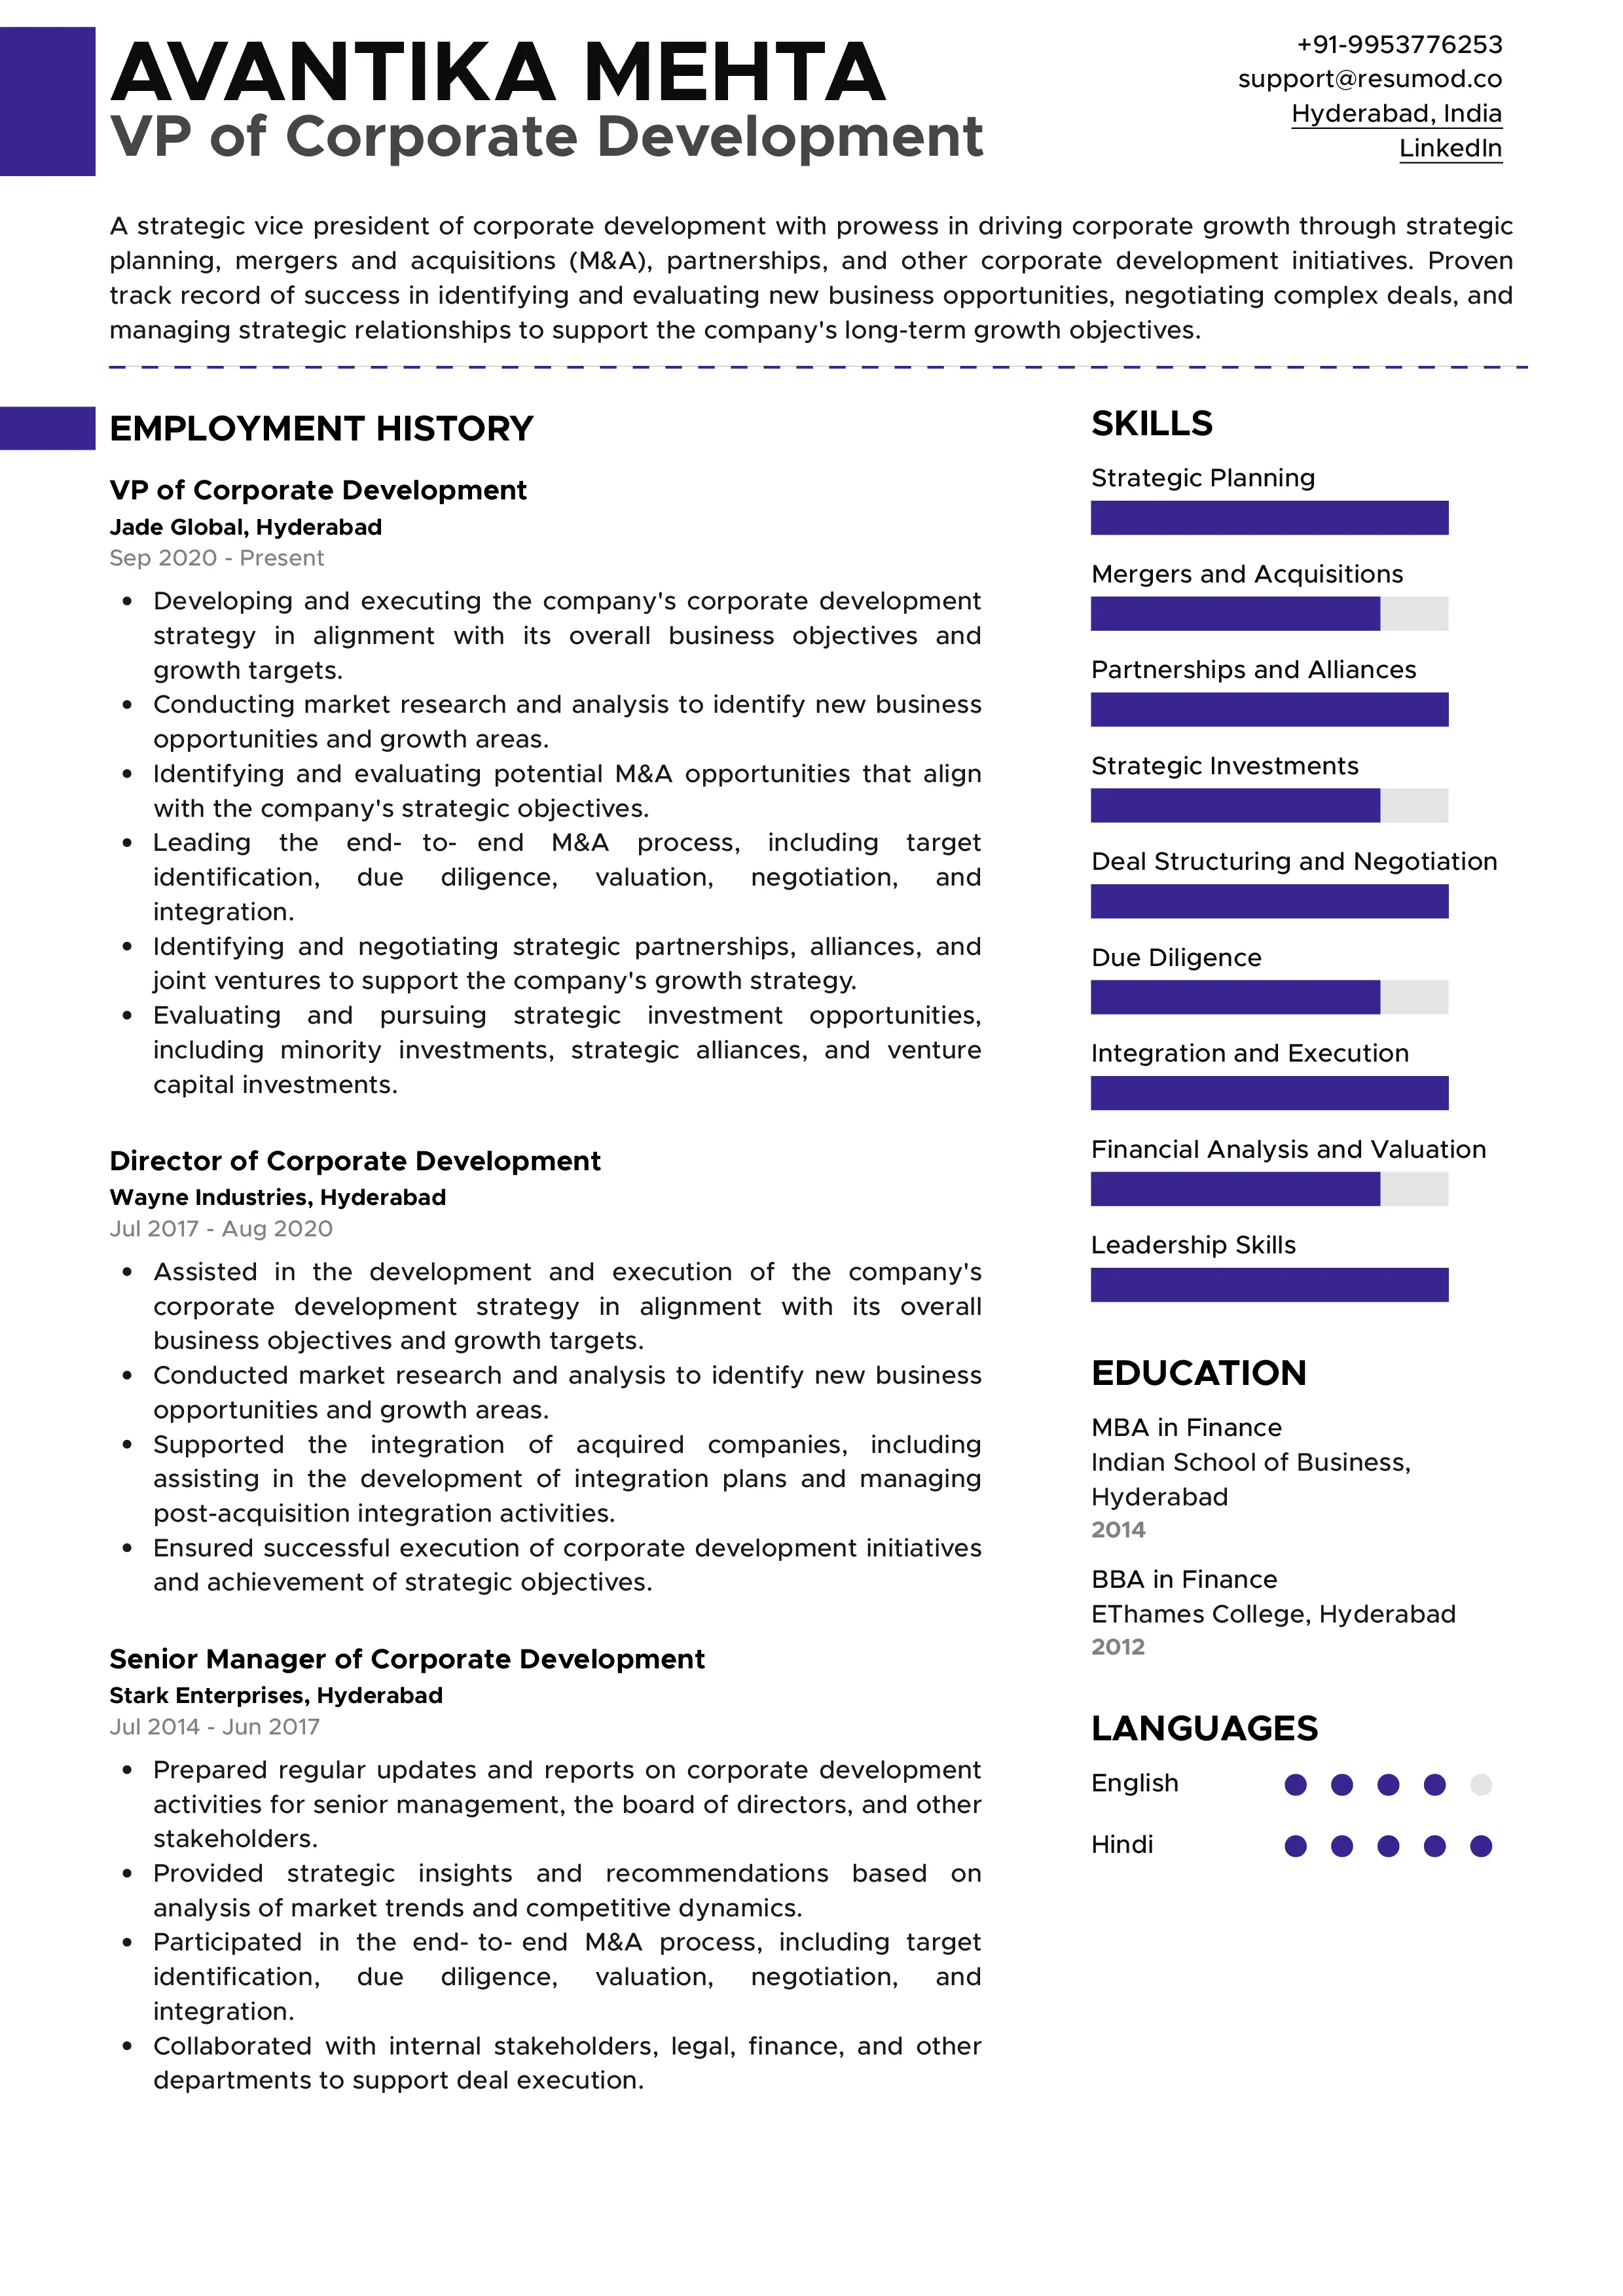 Sample Resume of Vice President of Corporate Development | Free Resume Templates & Samples on Resumod.co